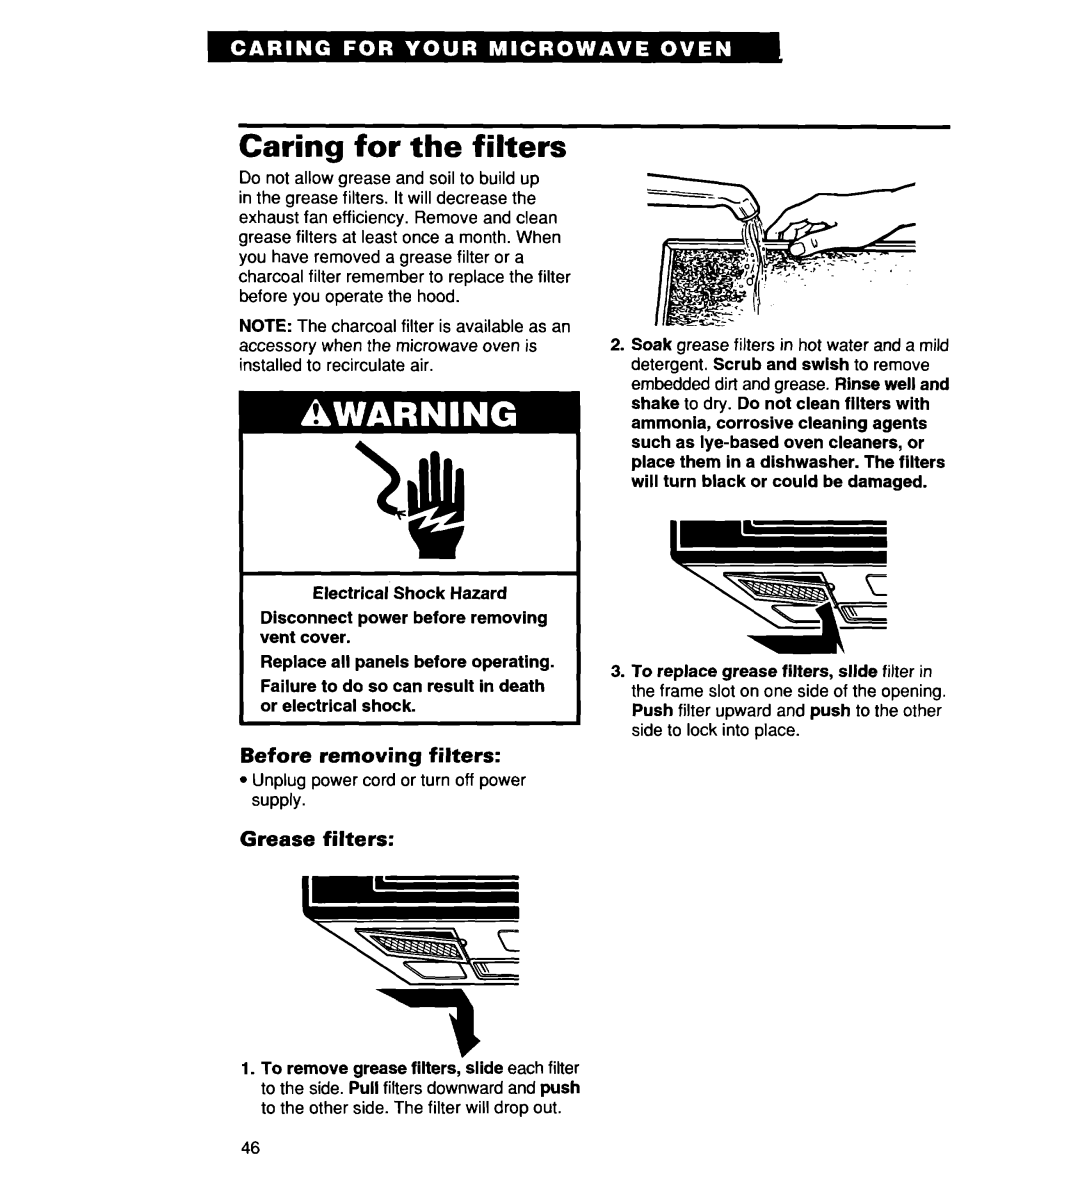 Whirlpool MH7135XE warranty Caring for the filters, Before removing filters, Grease filters 